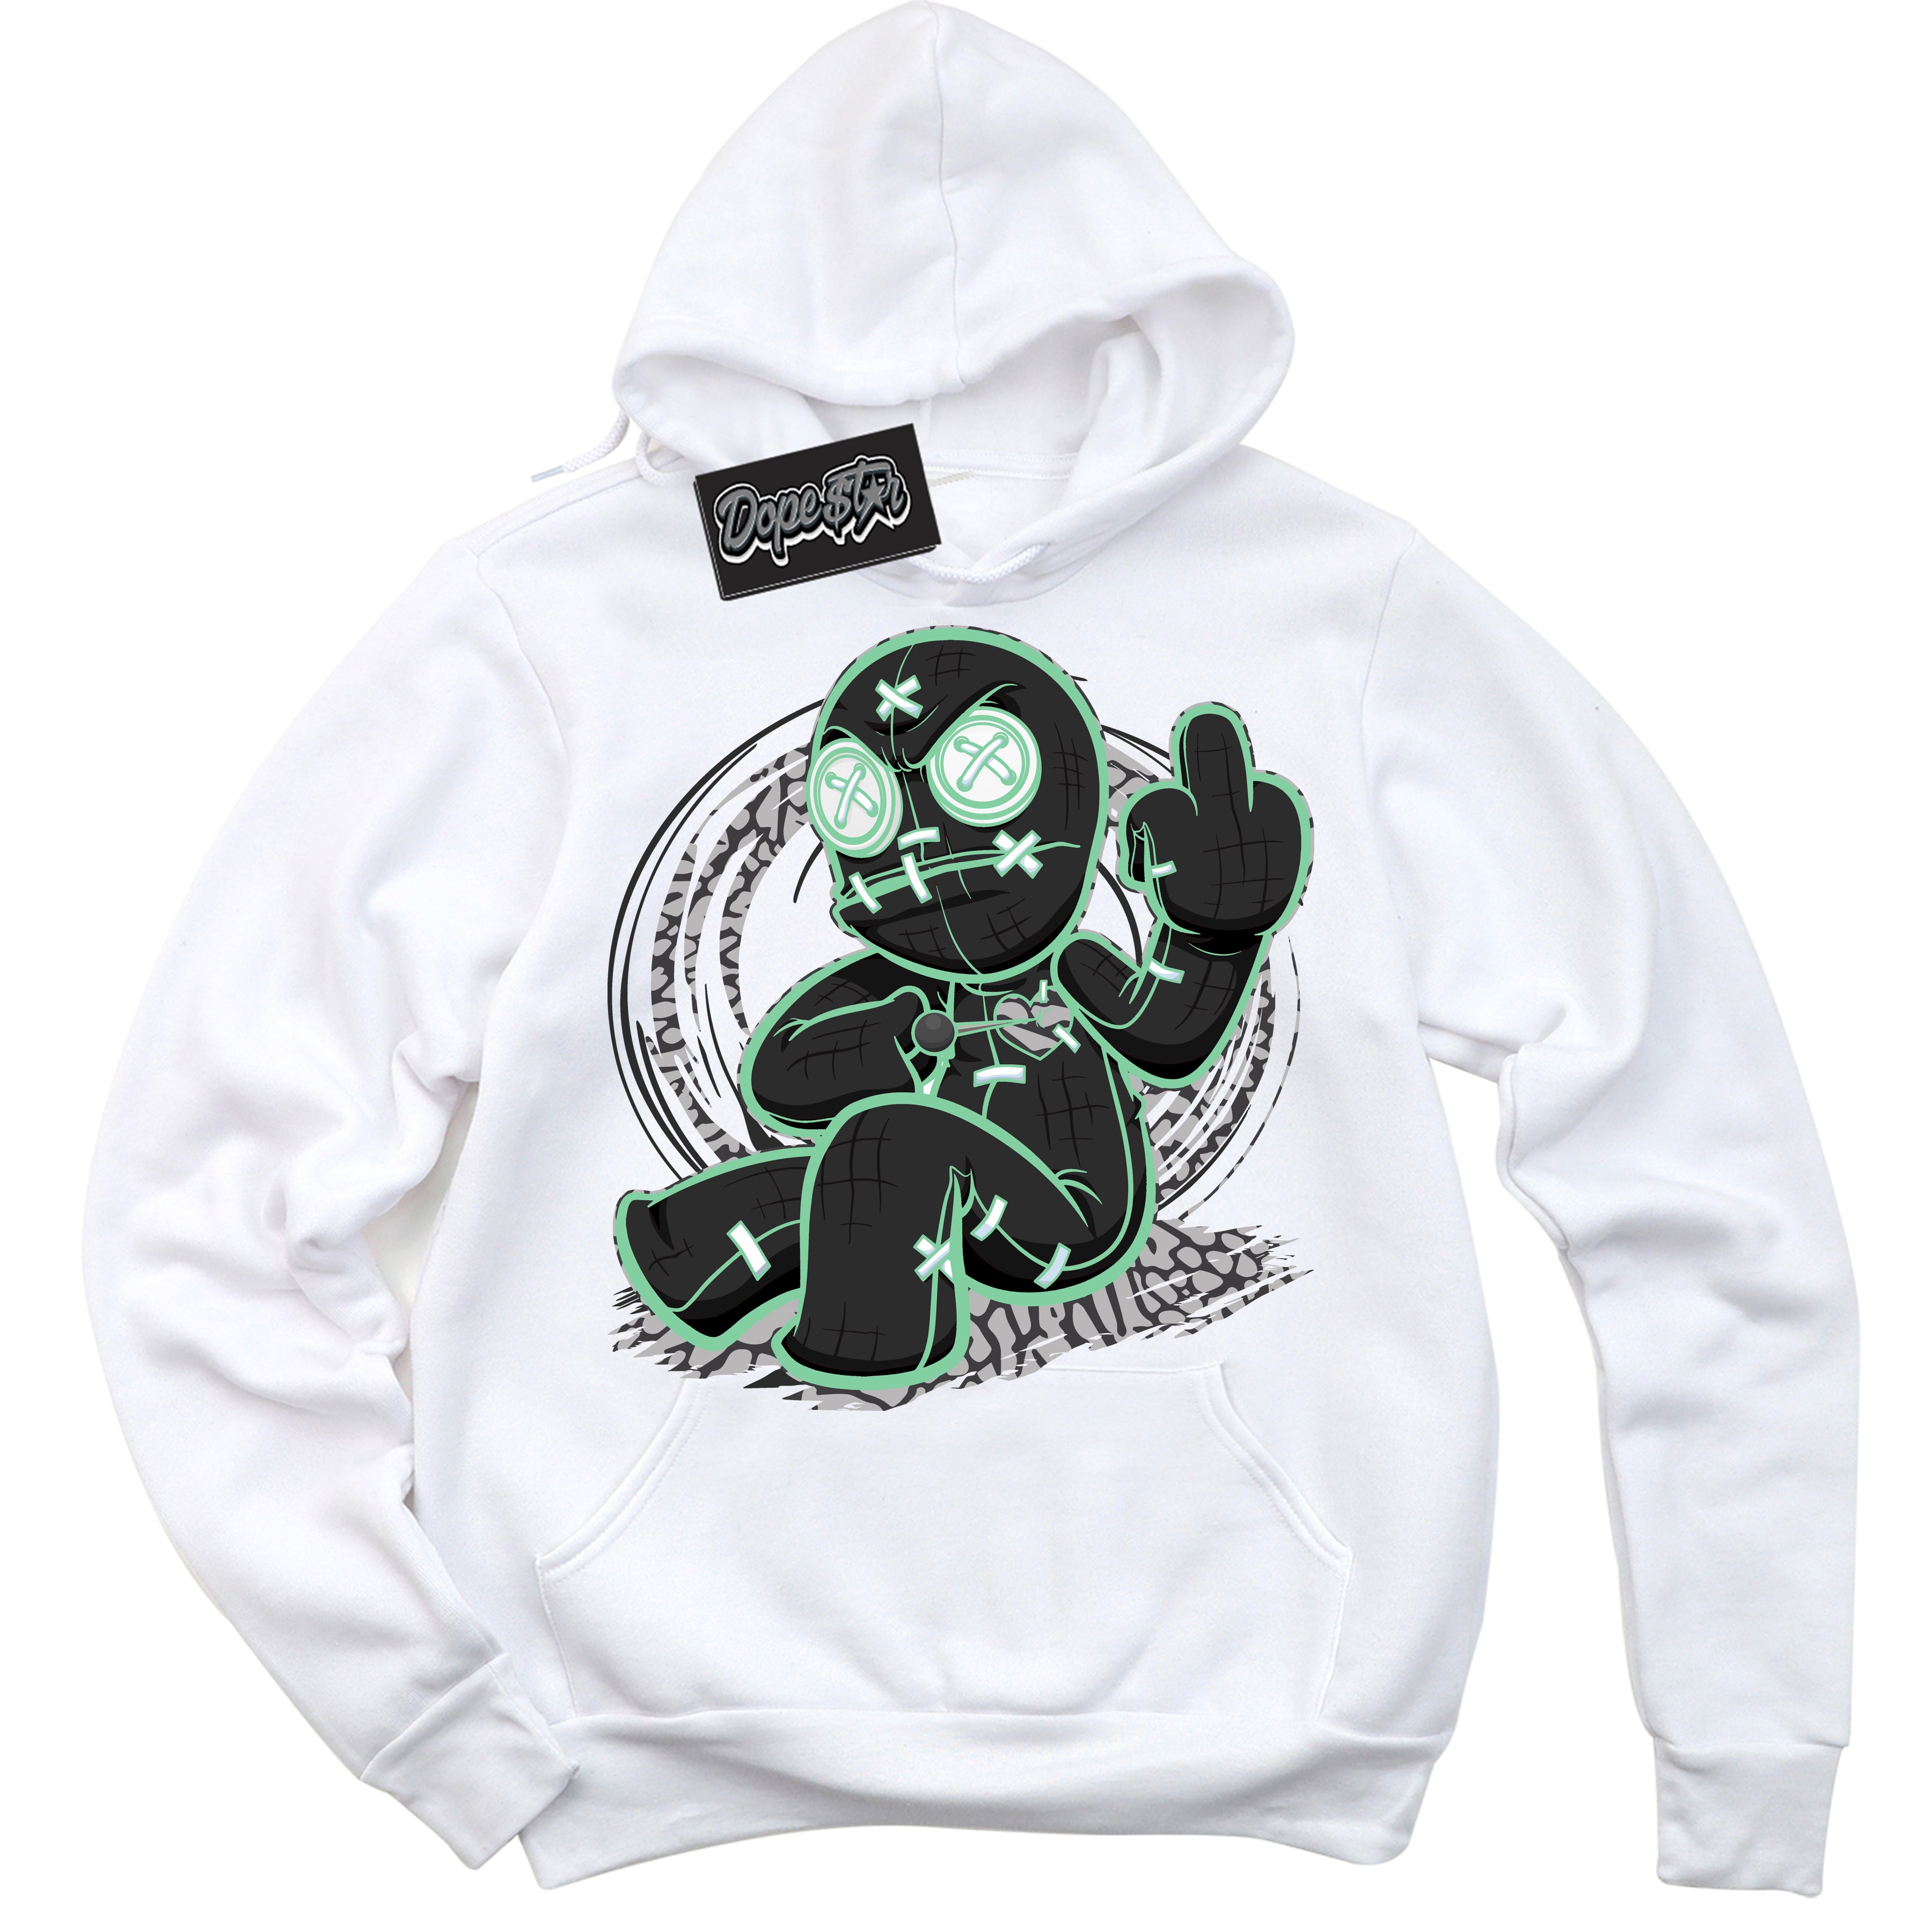 Cool White Graphic DopeStar Hoodie with “ VooDoo Doll “ print, that perfectly matches Green Glow 3s sneakers